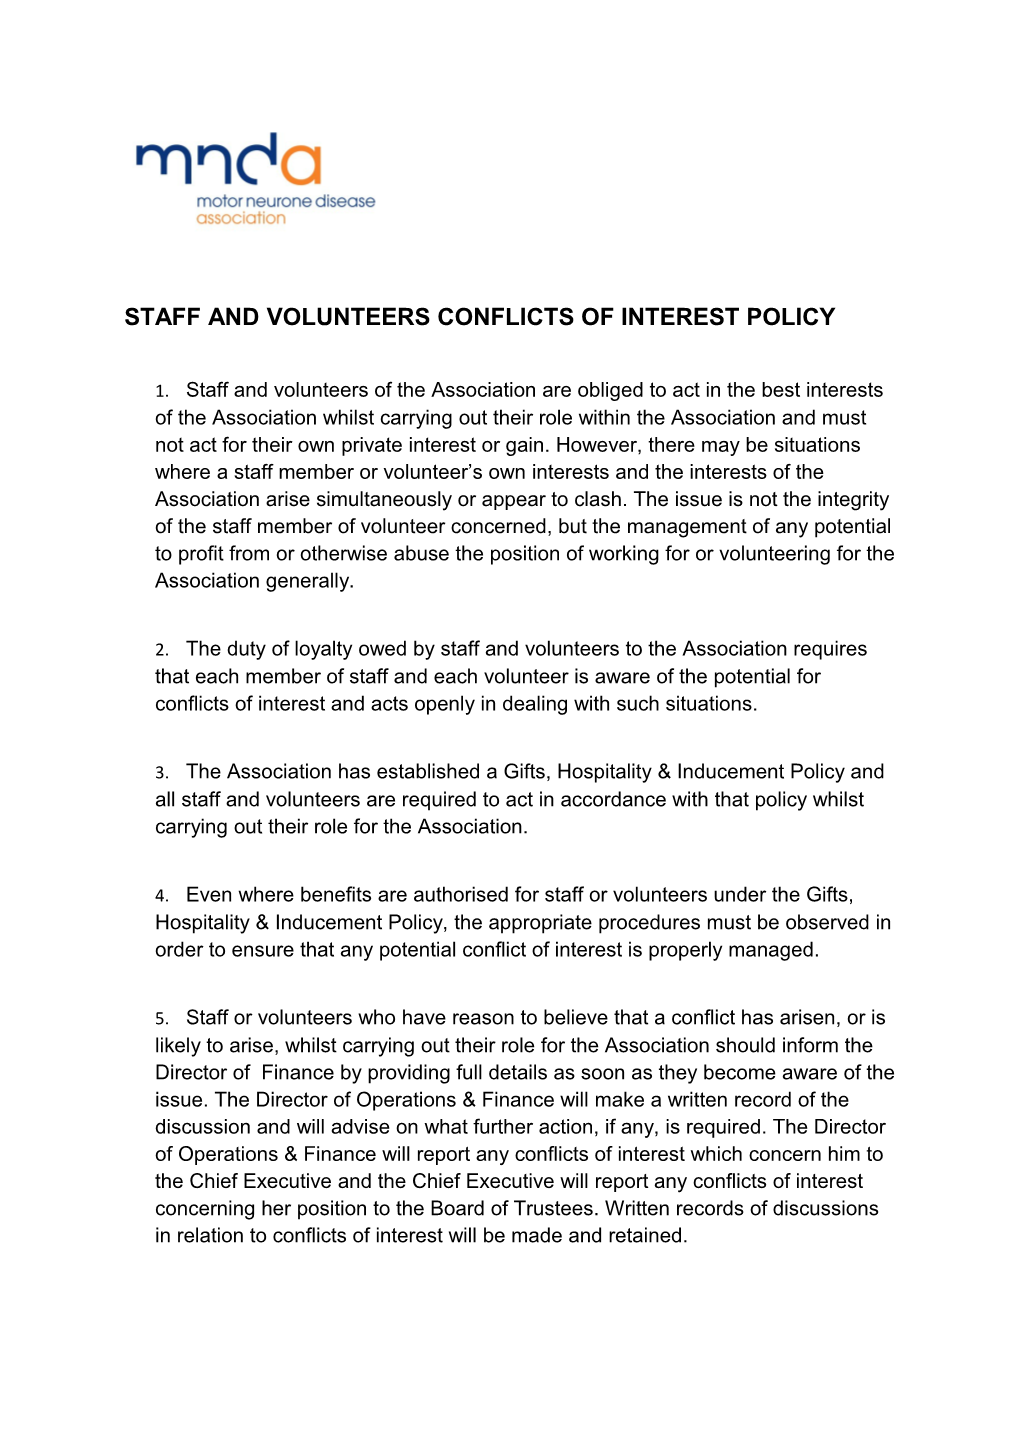 Staff and Volunteers Conflicts of Interest Policy